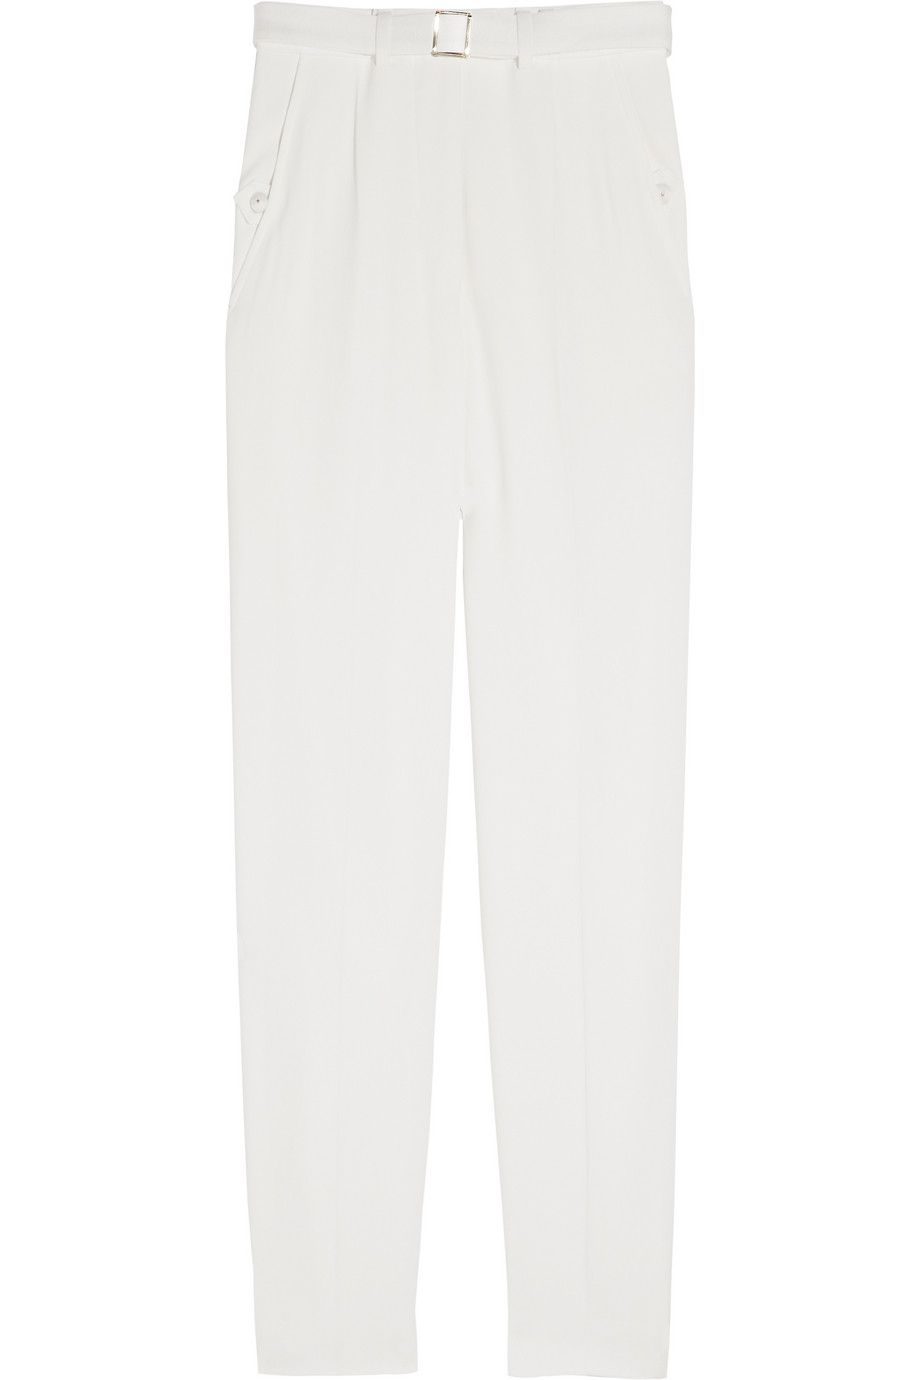 Saint Laurent High-waisted Crepe Pants in White | Lyst